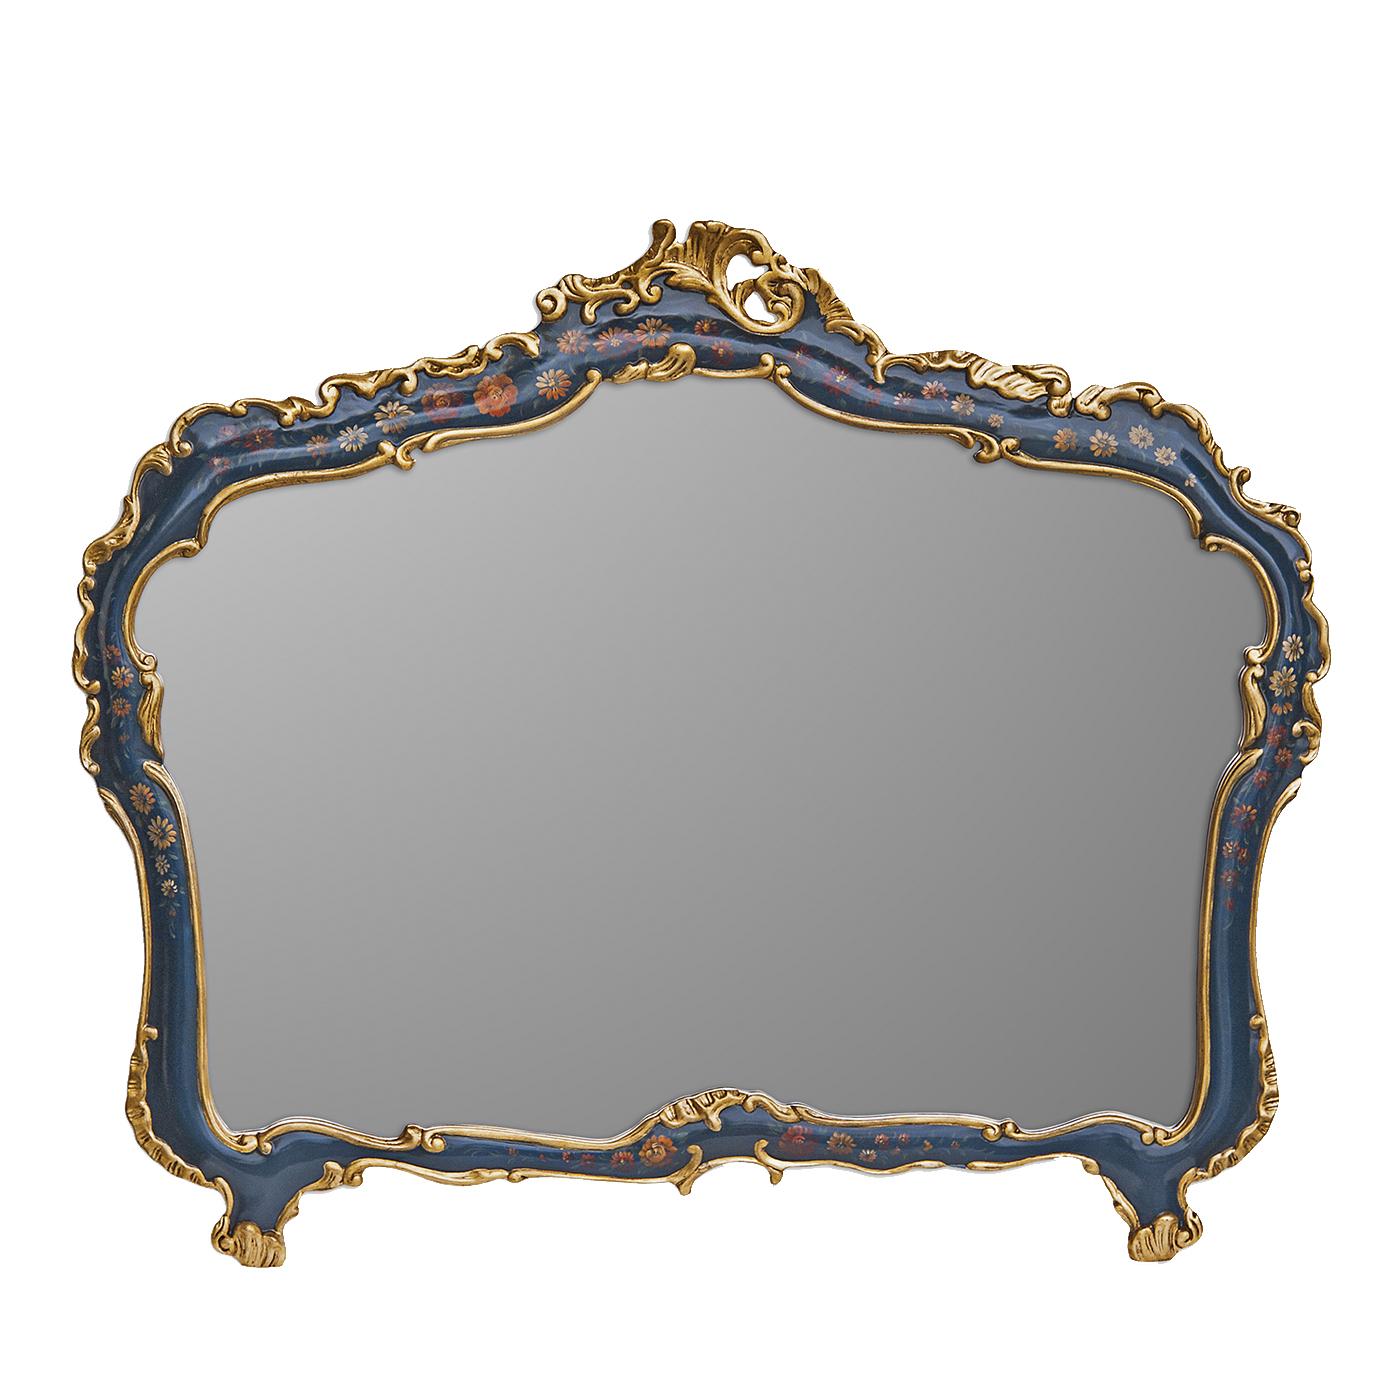 This magnificent mirror is an example of masterful craftsmanship. The large mirror is adorned with a thin frame in solid wood that was finely carved by hand and then hand painted. The vivid blue of the background is punctuated with elegant red and